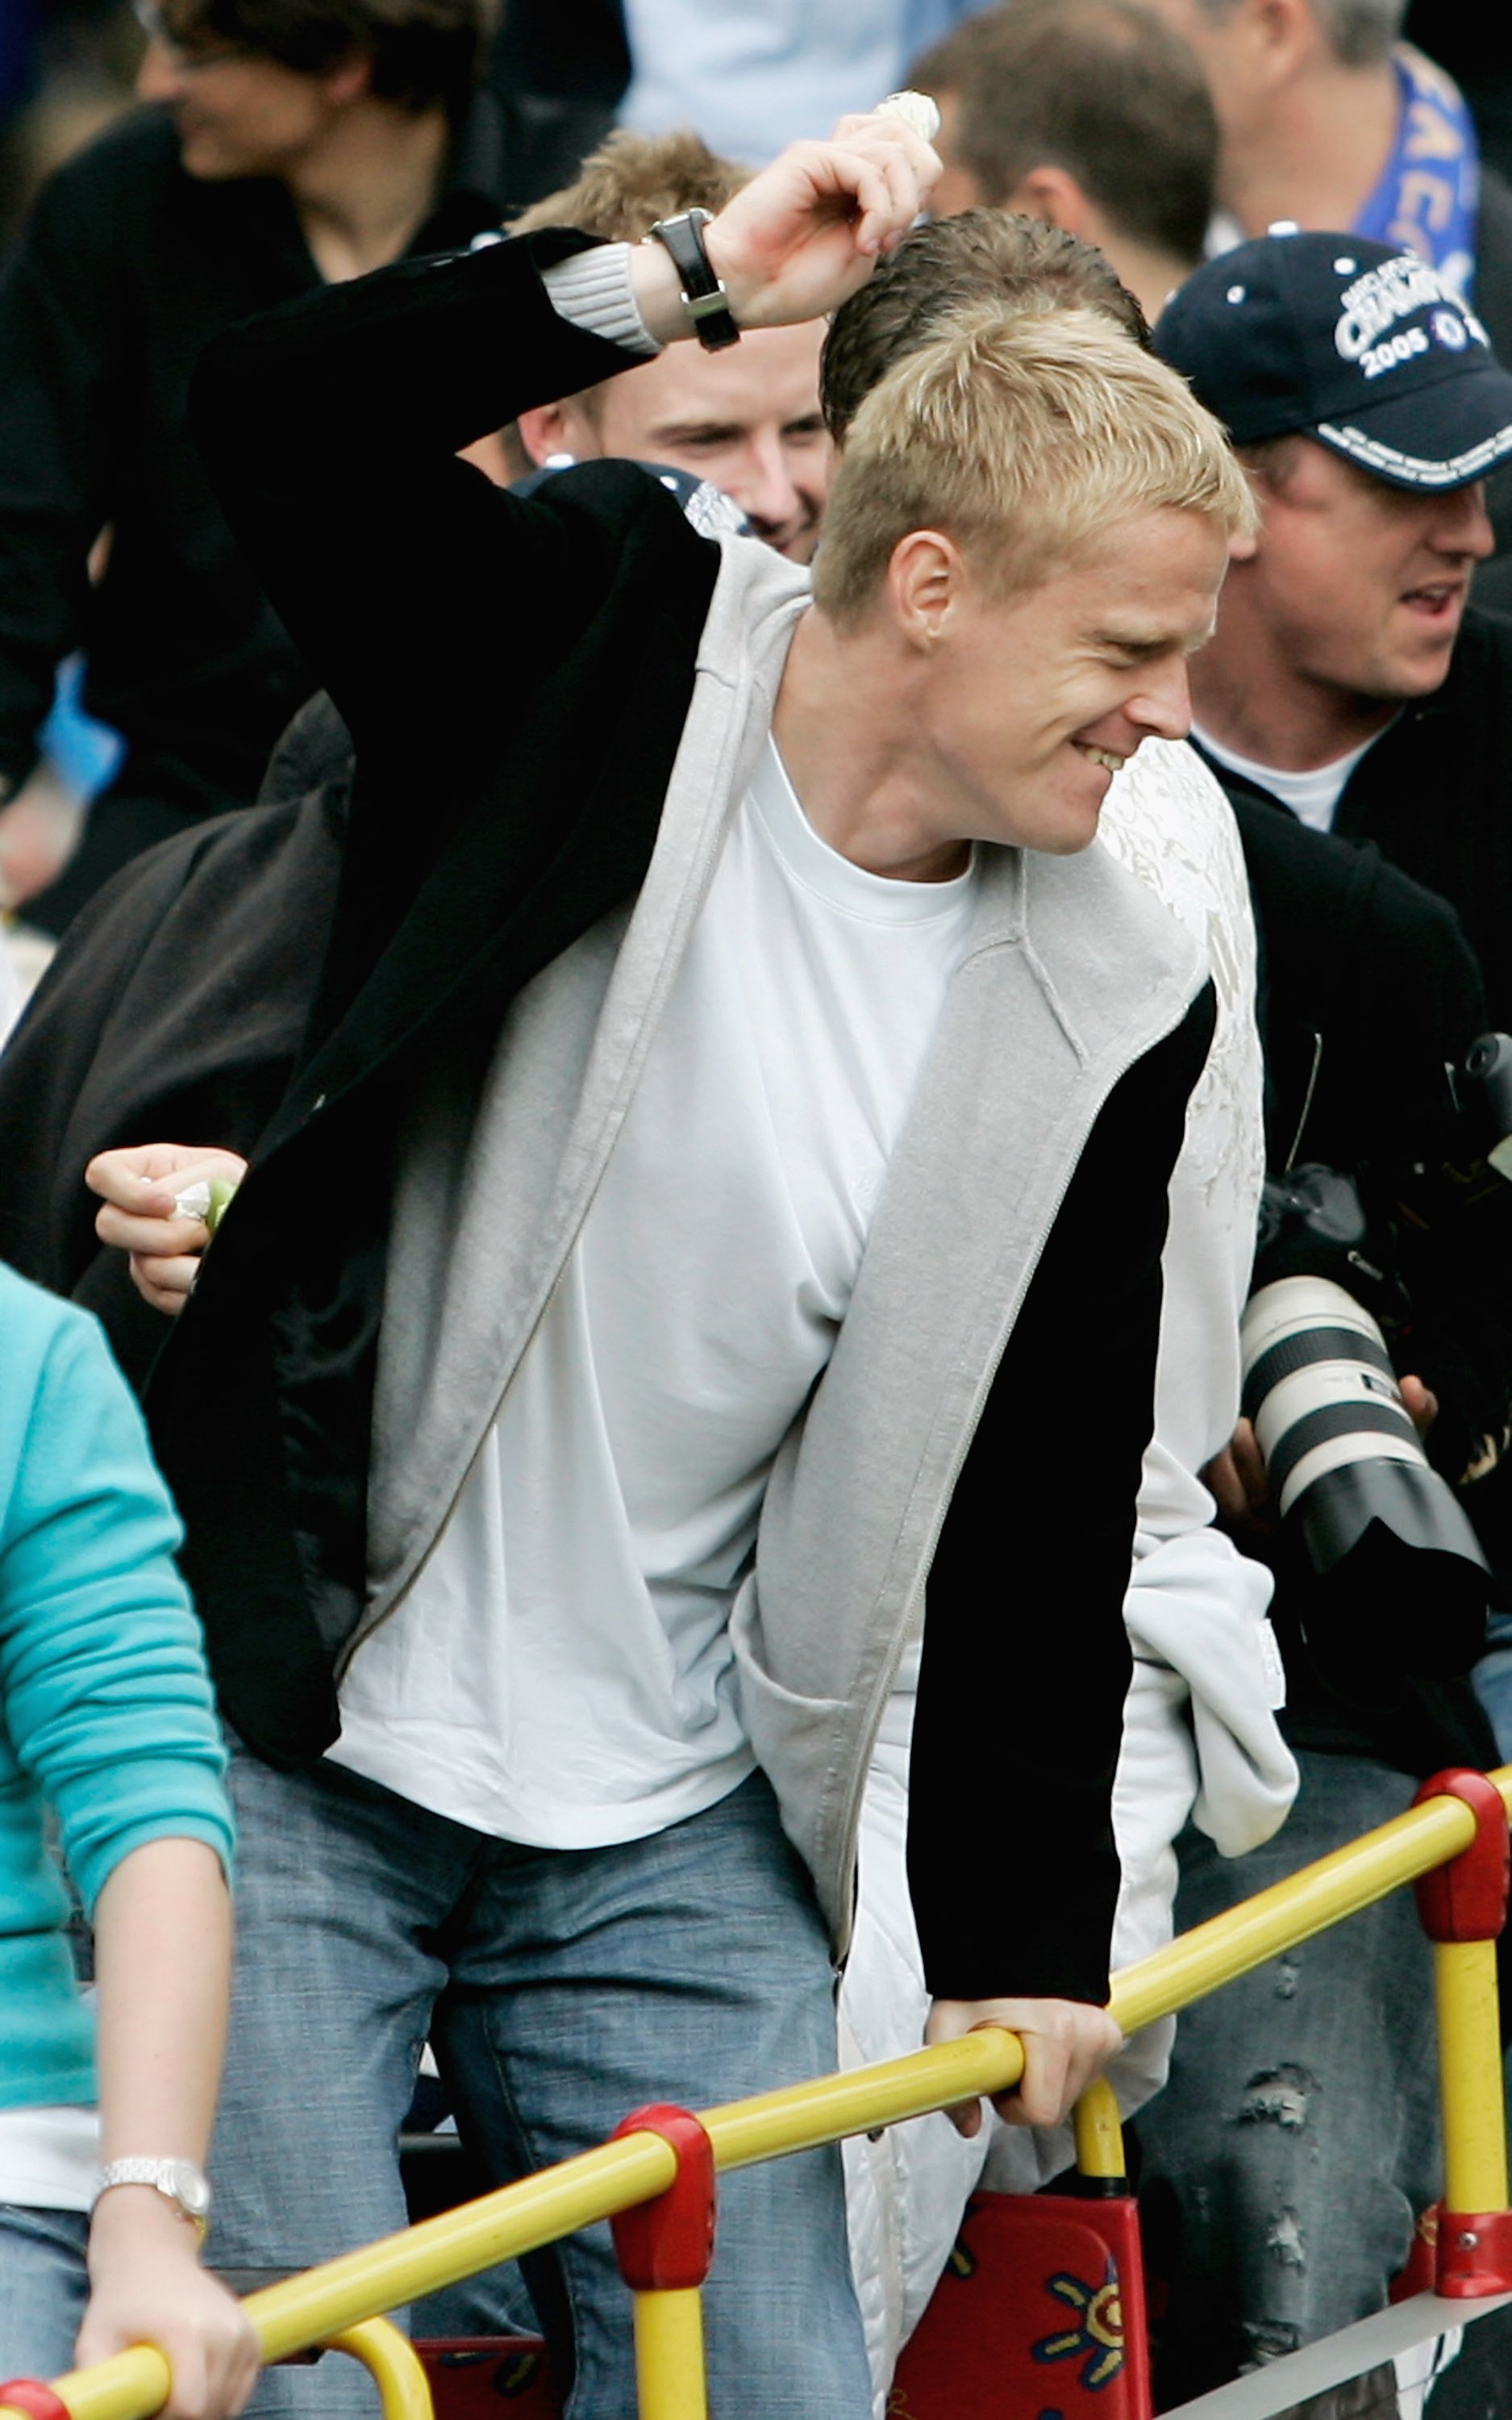 Damian Duff lobbed some celery back at supporters in a 2006 trophy parade